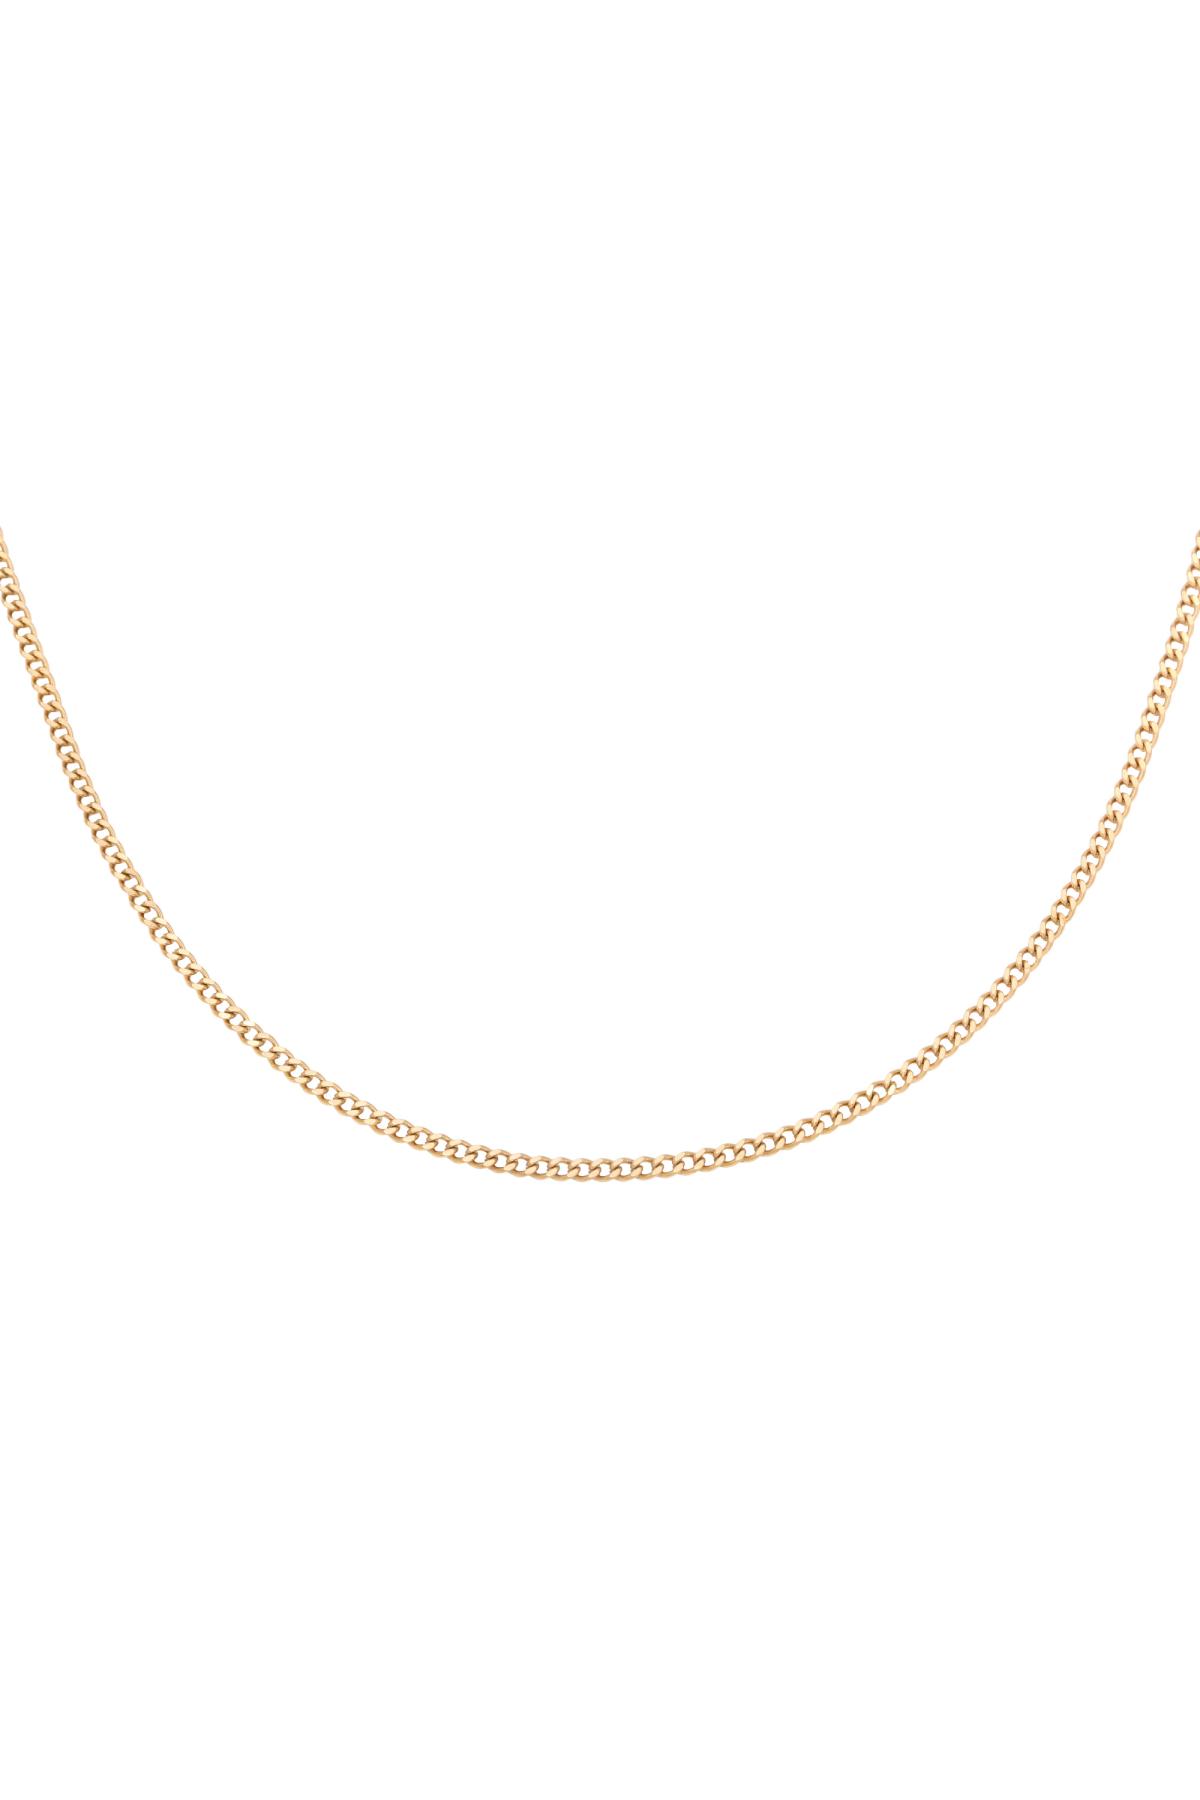 Necklace Tiny Plain Chains Gold Stainless Steel h5 